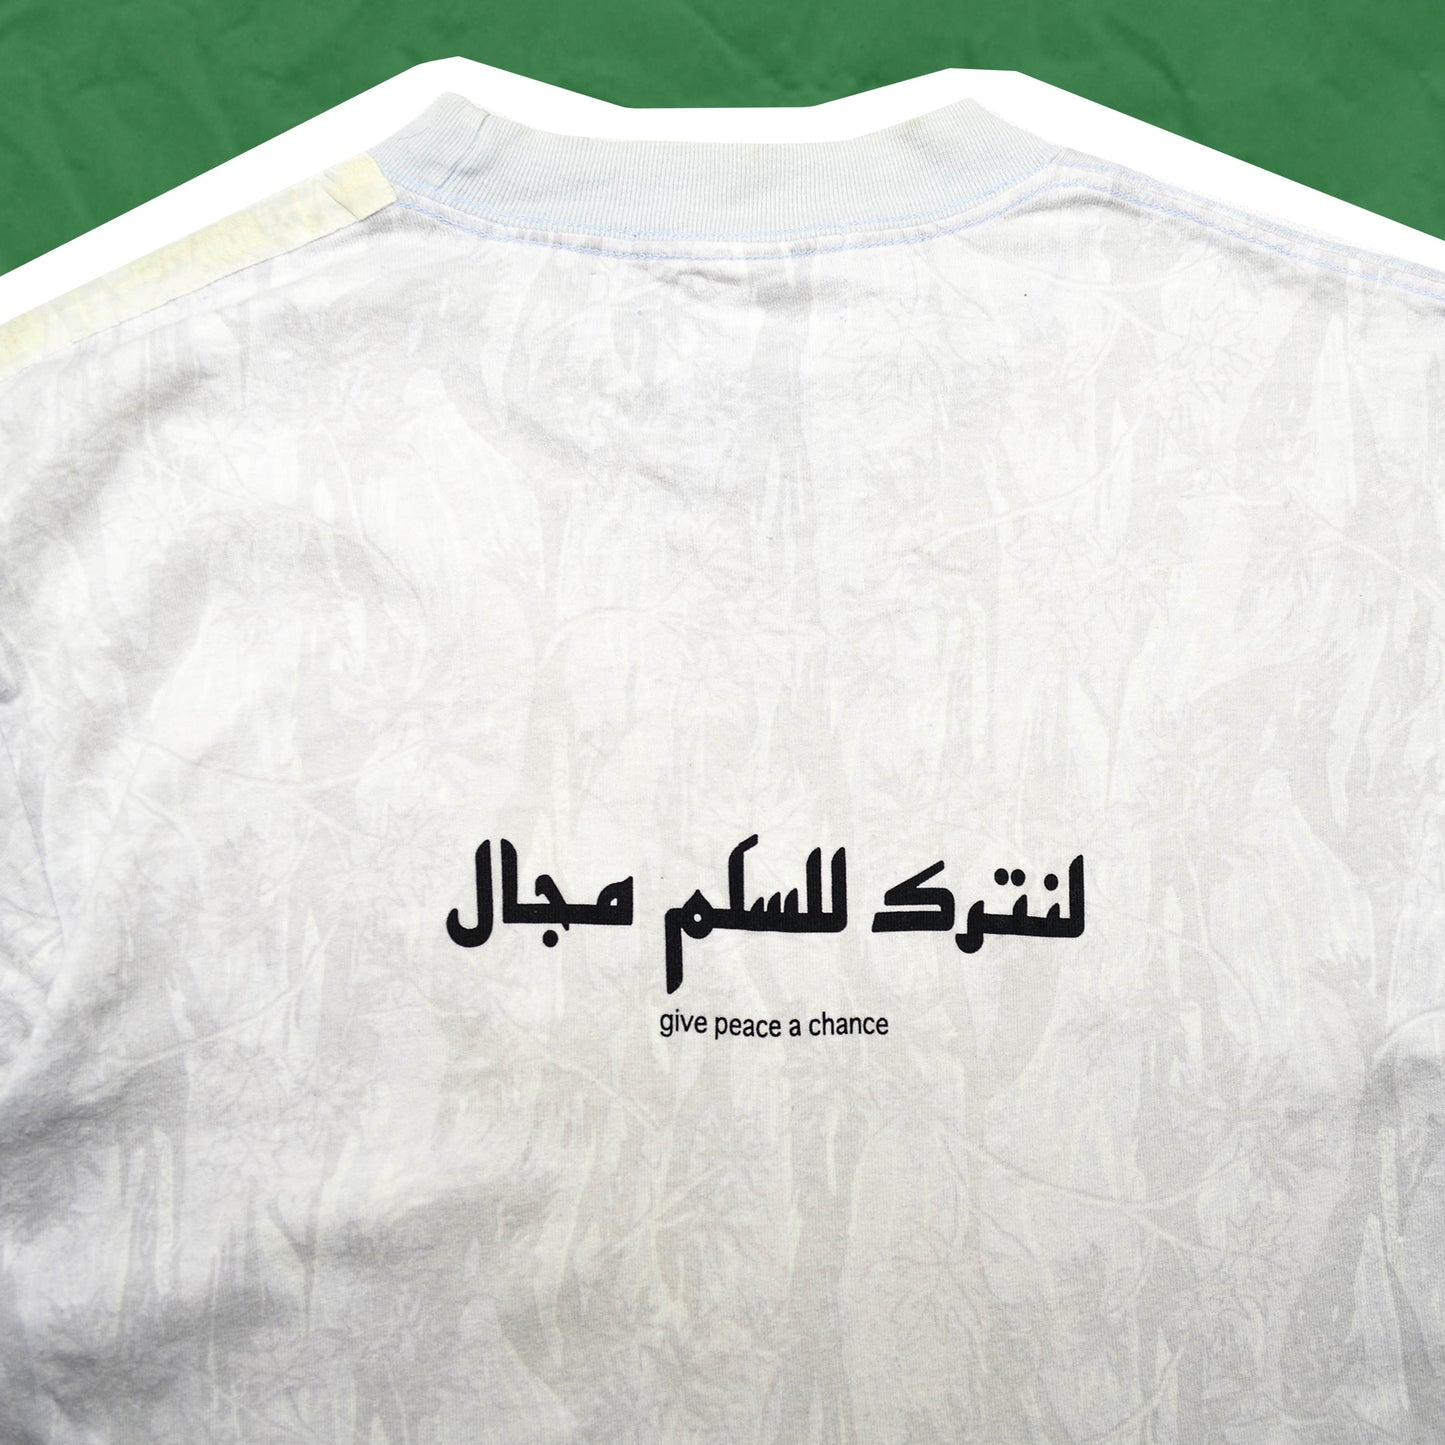 General Research "Go to woods" / "Give peace a chance" Arabic Subtle Tonal Camo T shirt (M)